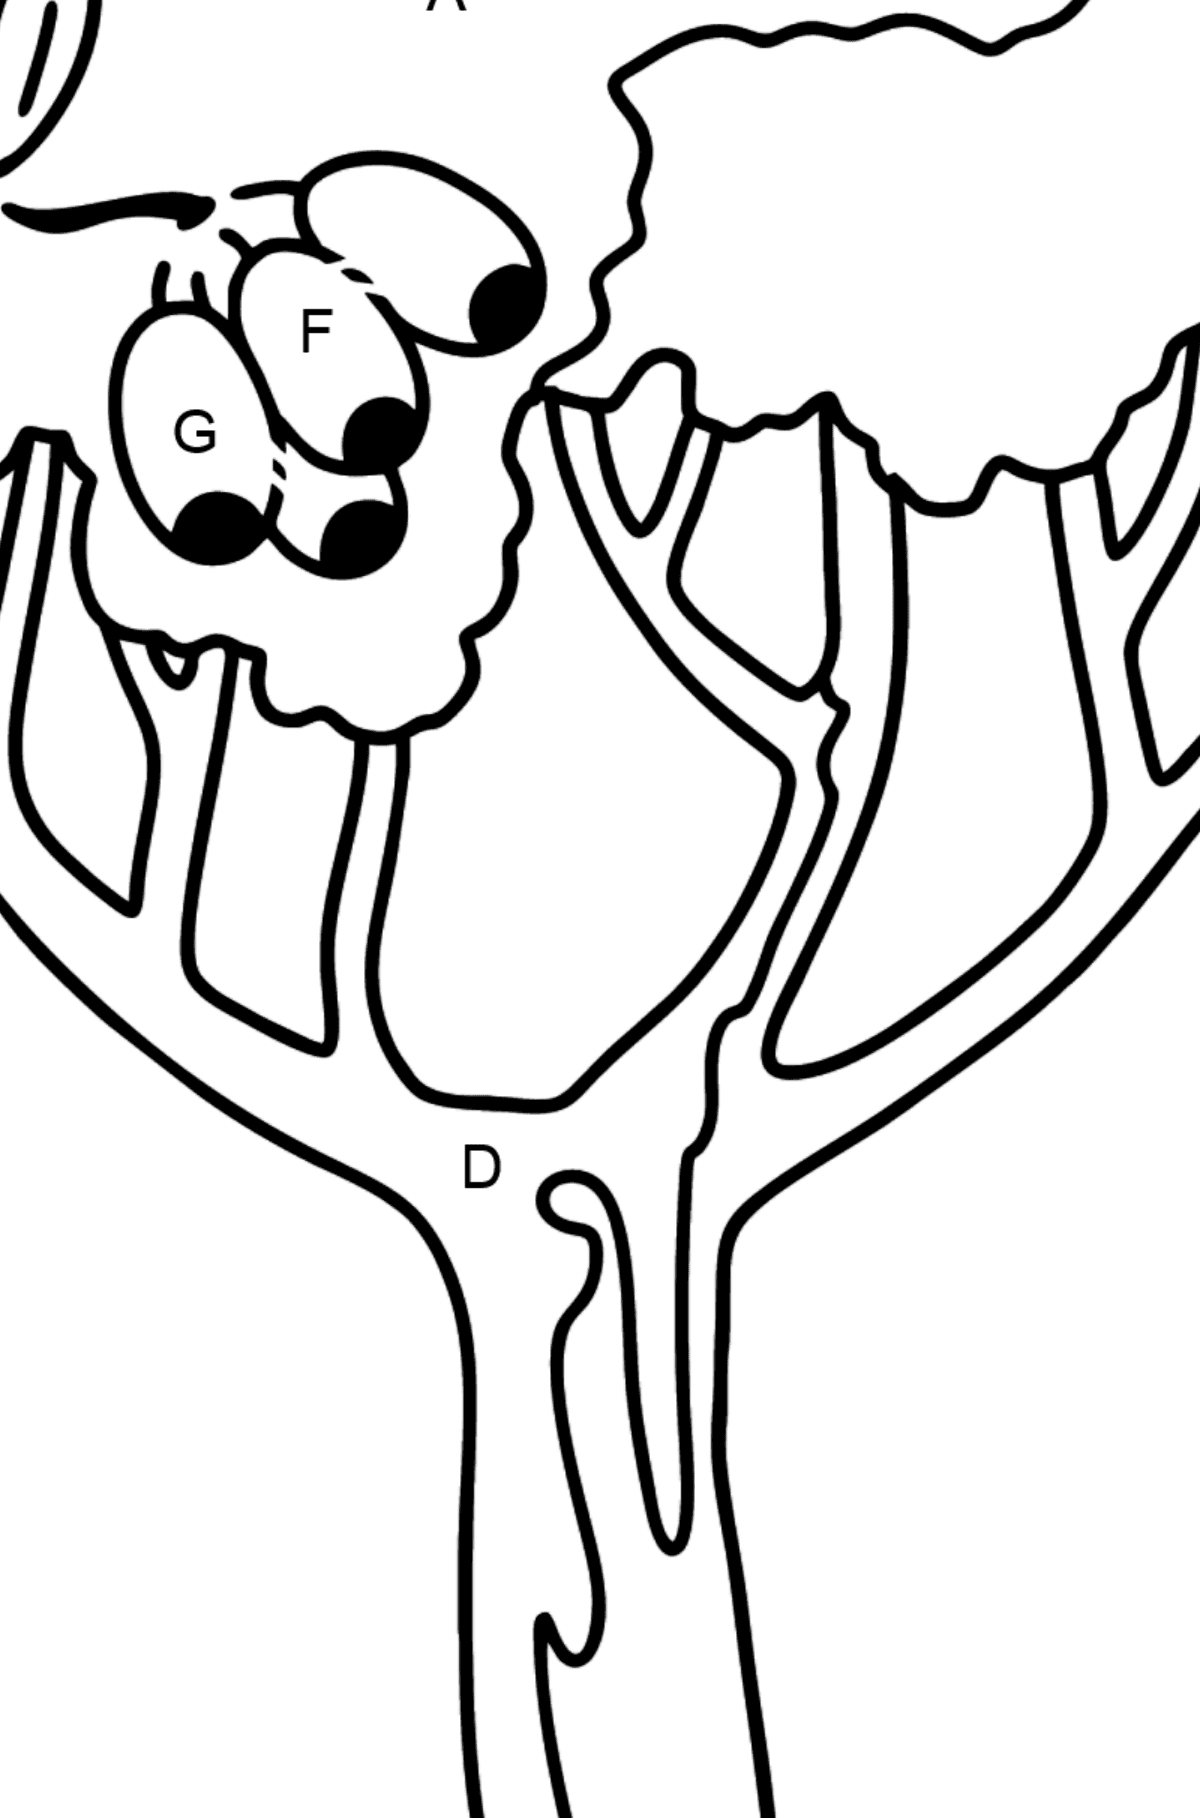 Gum tree - Corimbia coloring page - Coloring by Letters for Kids